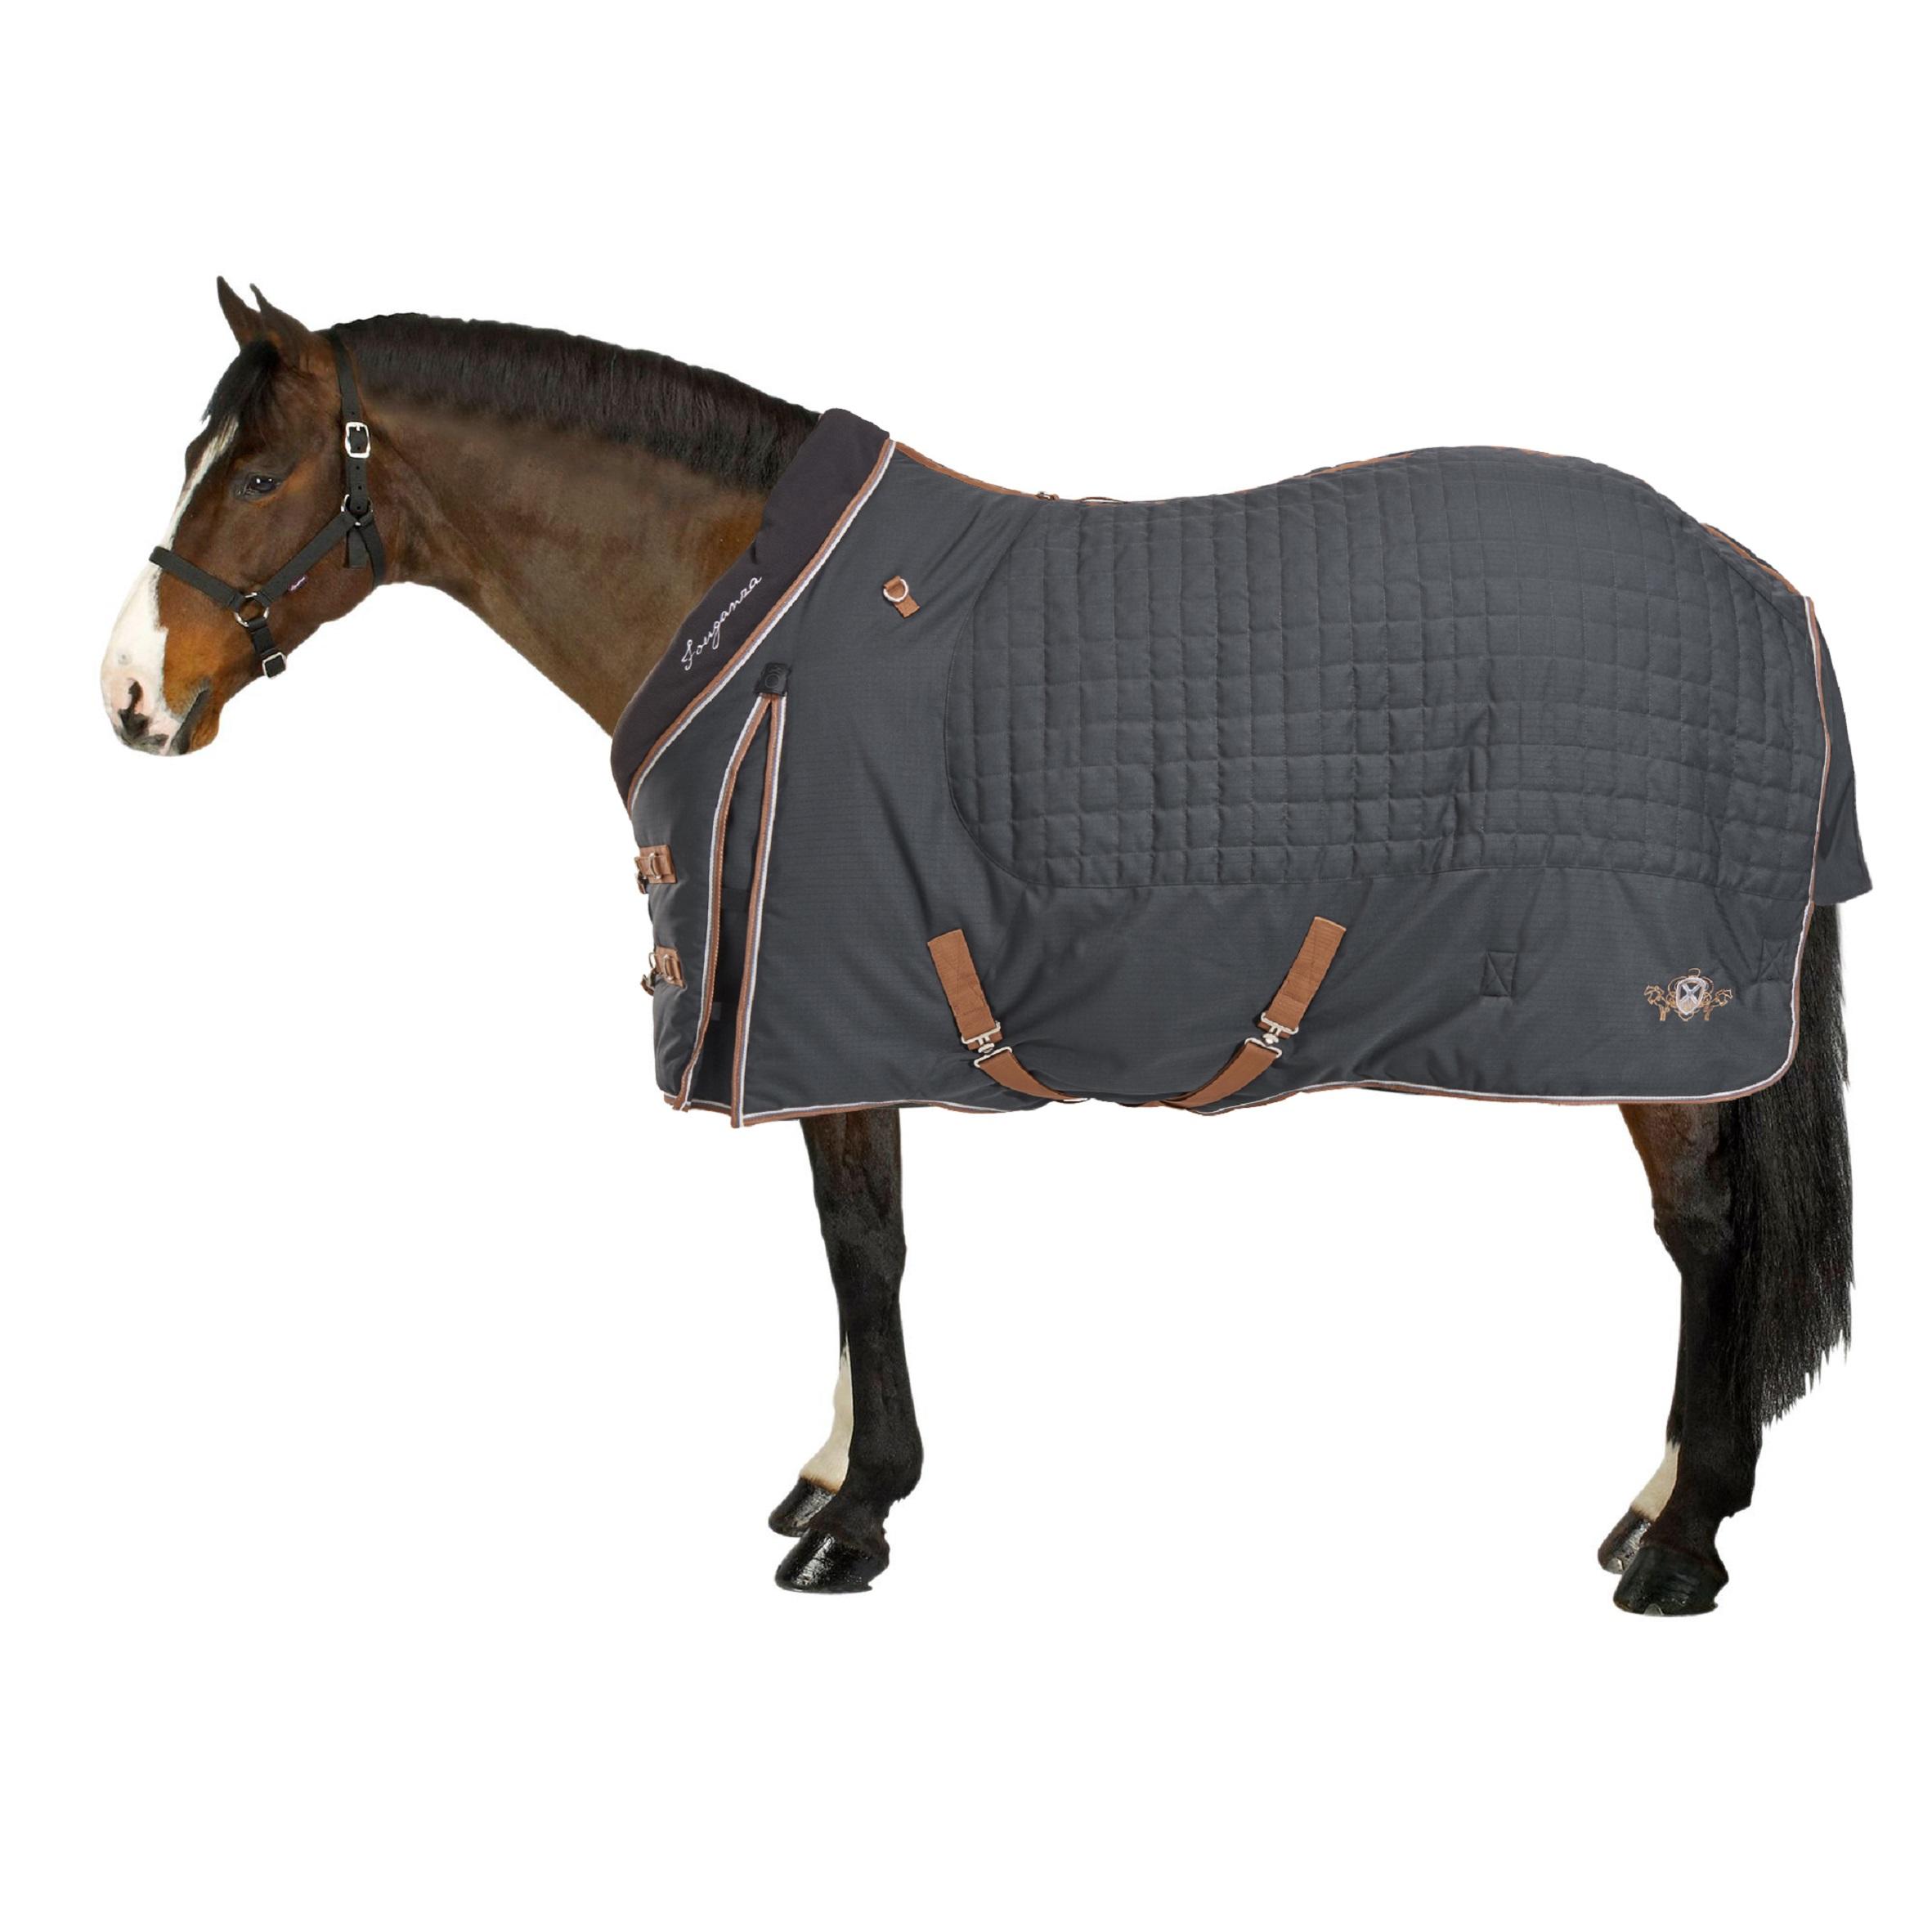 FOUGANZA ST400 Horse Riding Stable Rug for Horses and Ponies - Dark Grey